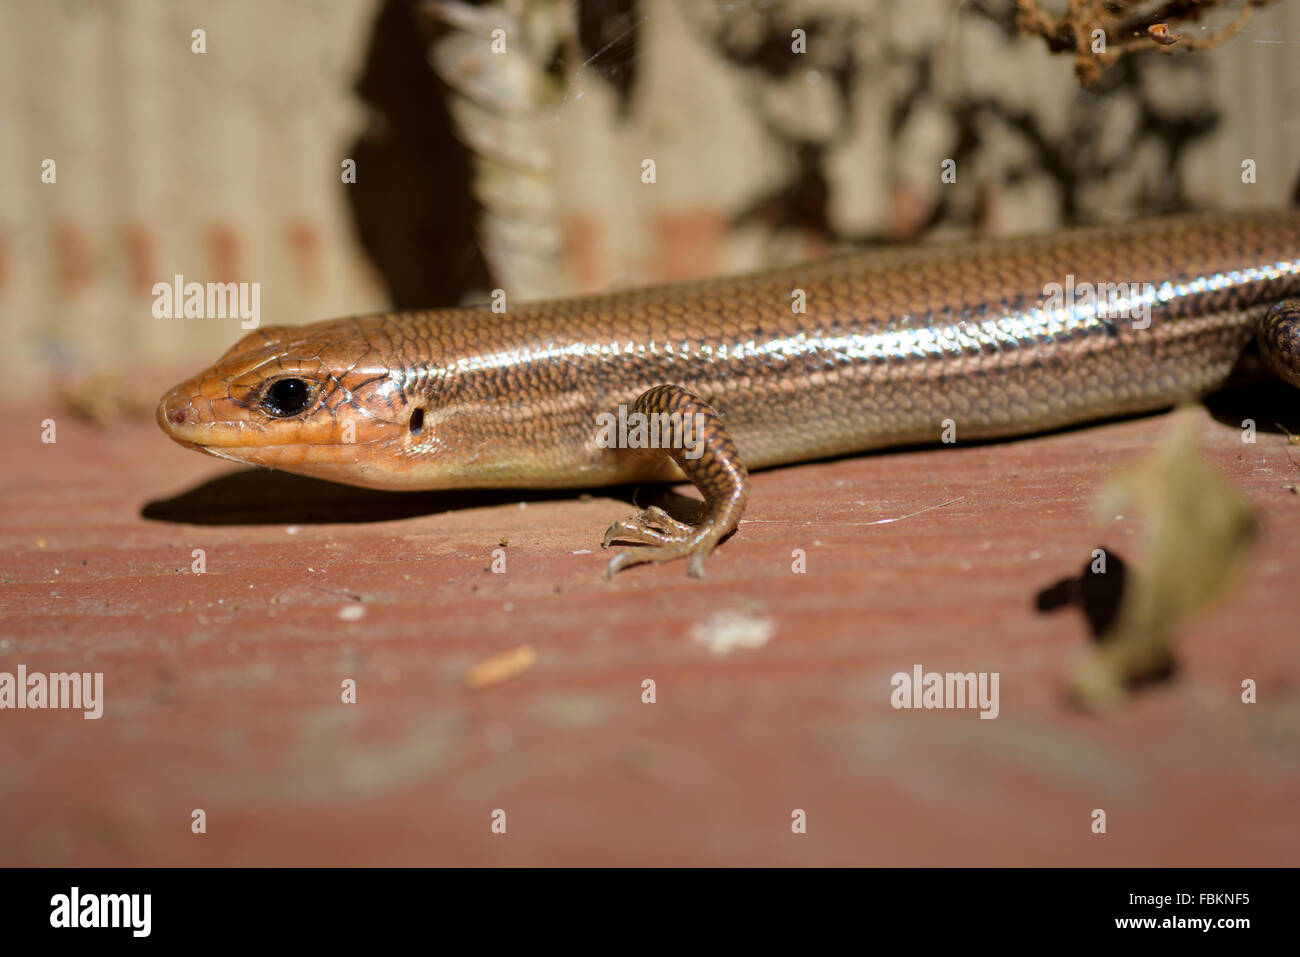 Five-lined skink lizard warms up in a sunny spot Stock Photo